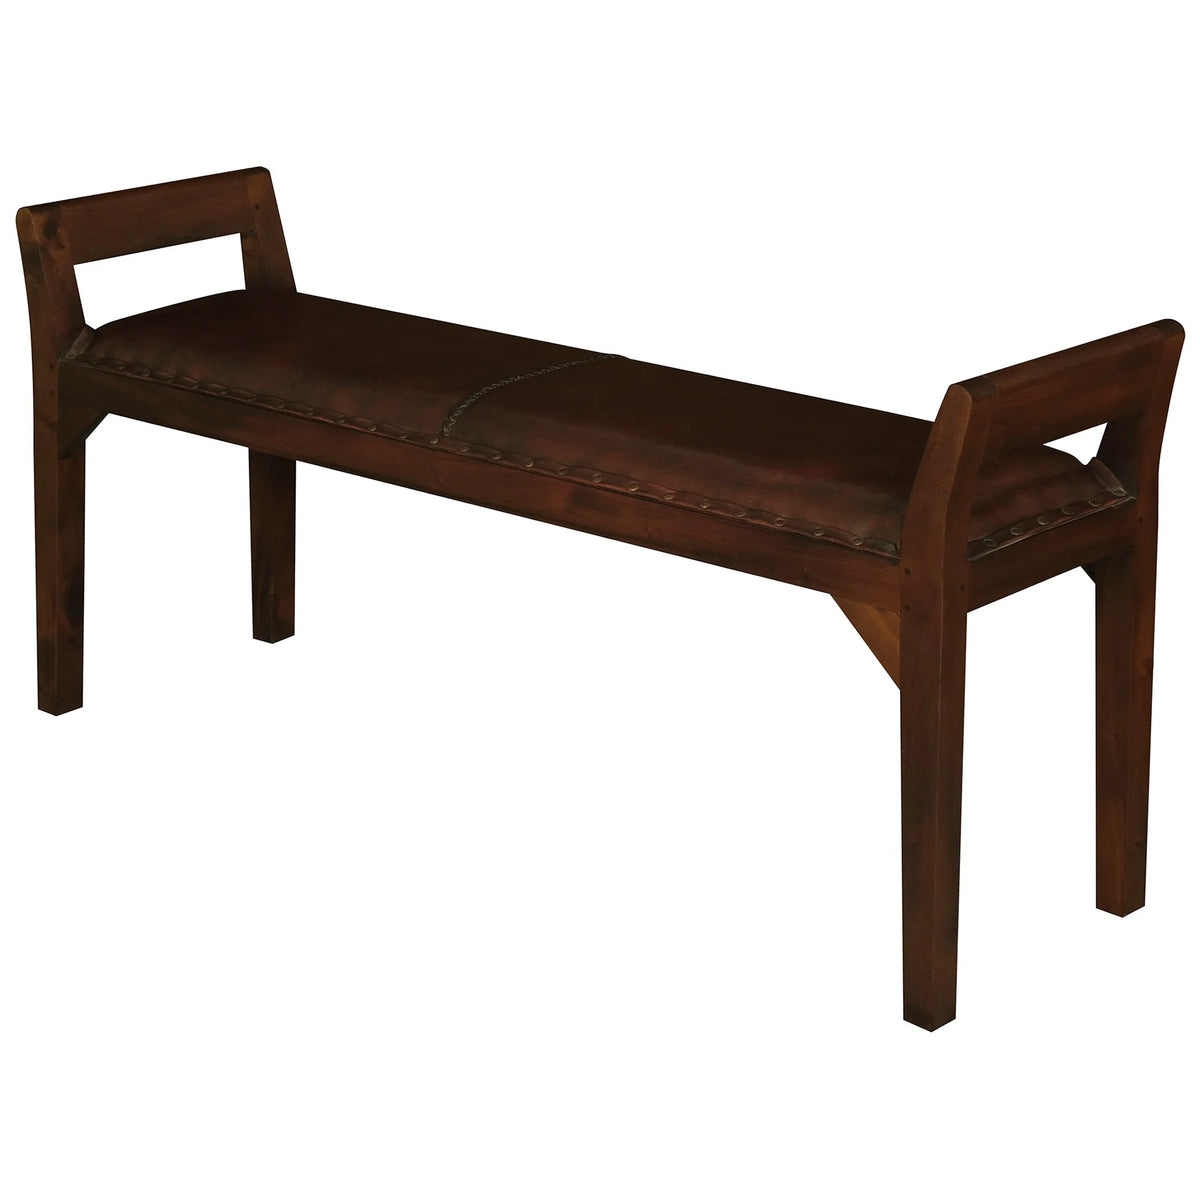 Boston Timber and Leather 2 Seater Bench - Mahogany